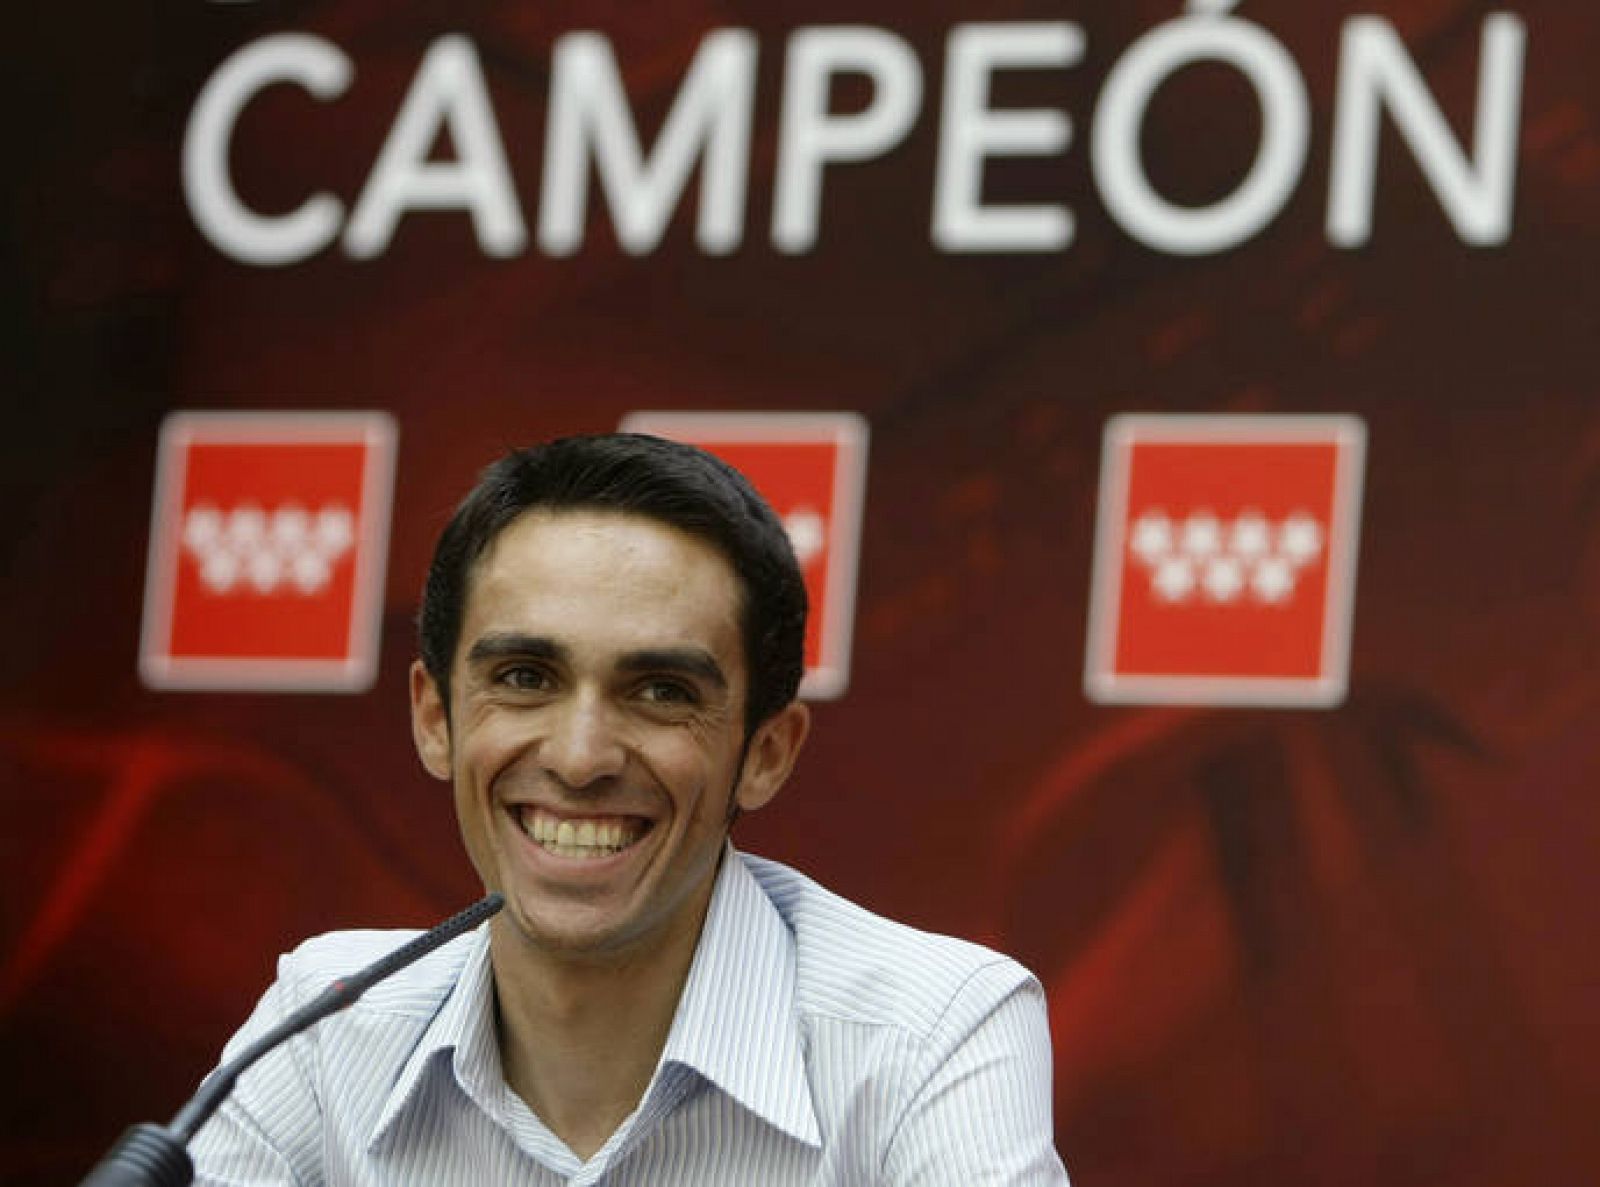 Tour de France winner Contador smiles during a news conference in Madrid